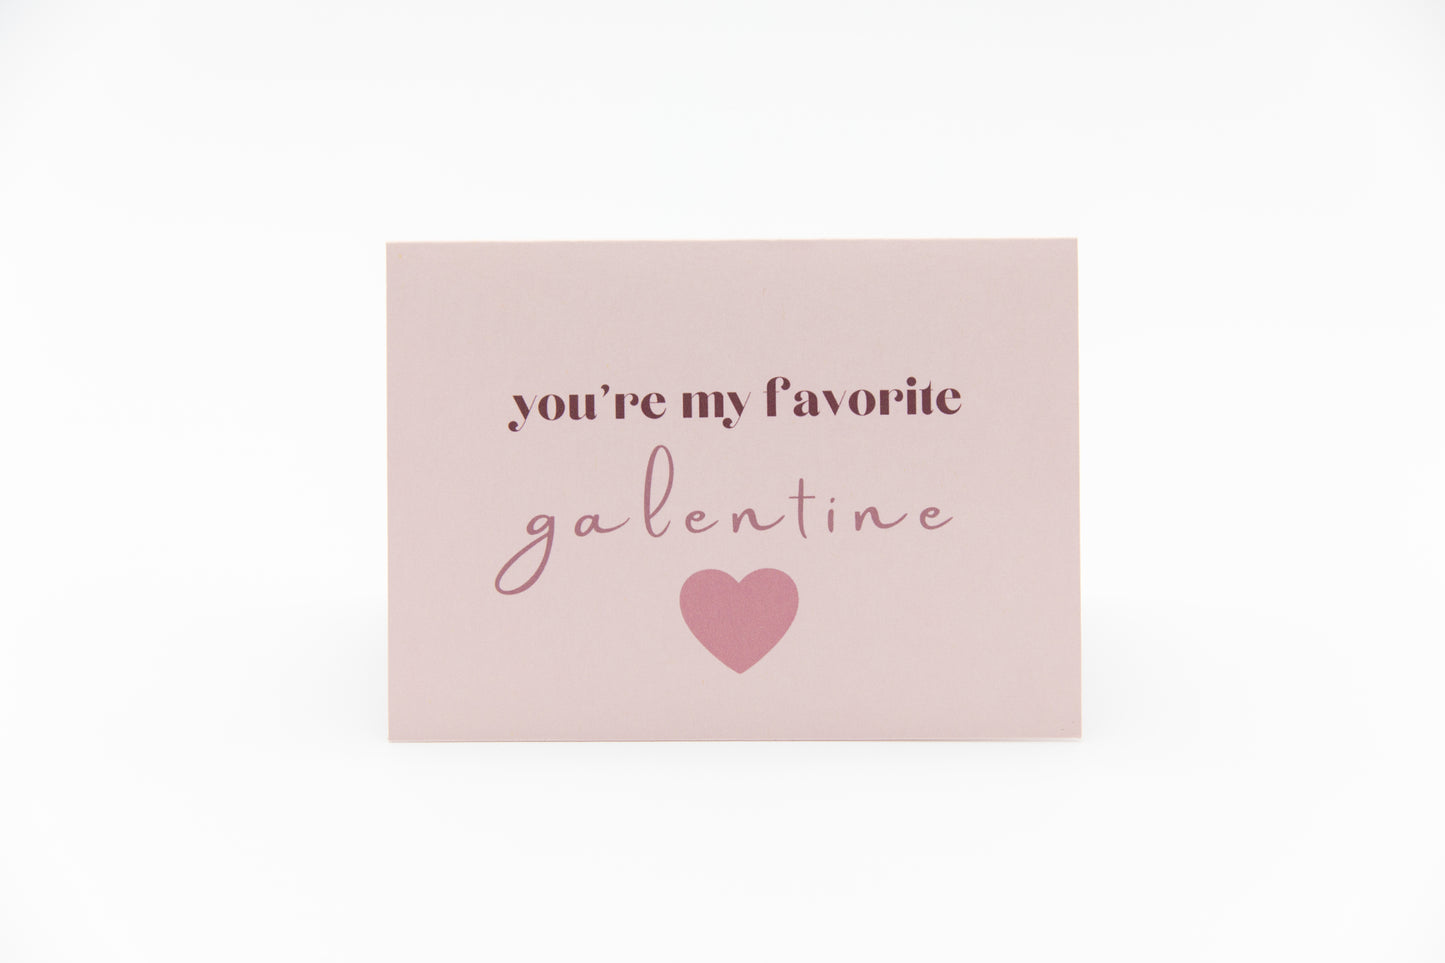 You're My Favorite Galentine Greeting Card